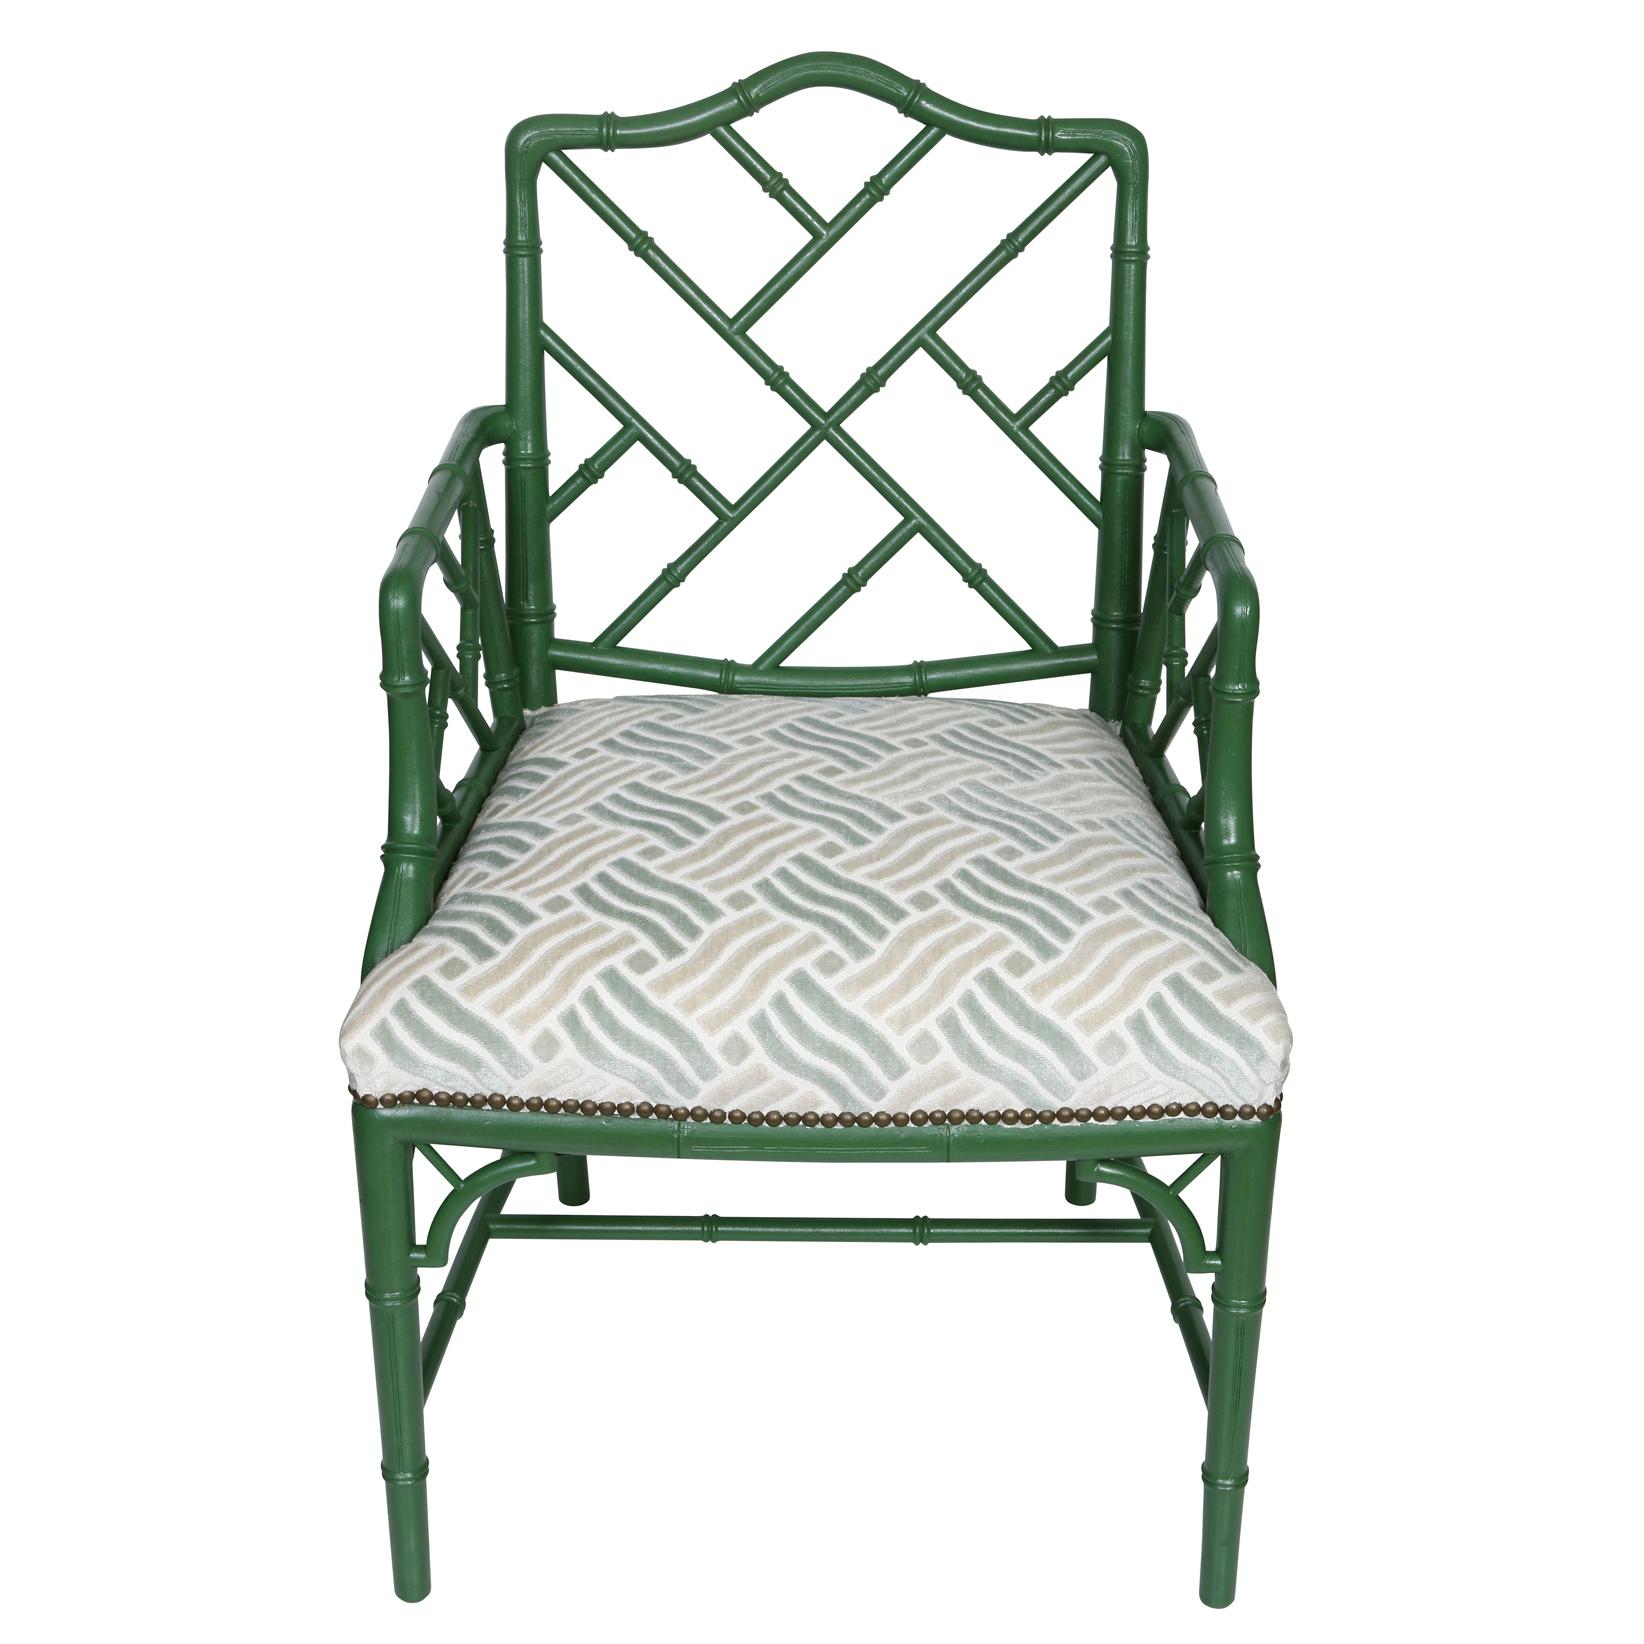 A pair of green wood, faux bamboo arm chairs with newly upholstered cut velvet seat cushions.  The newly painted green chair frames have a shaped back and diagonal bamboo design within the arms and back of each chair.  The legs are straight with a